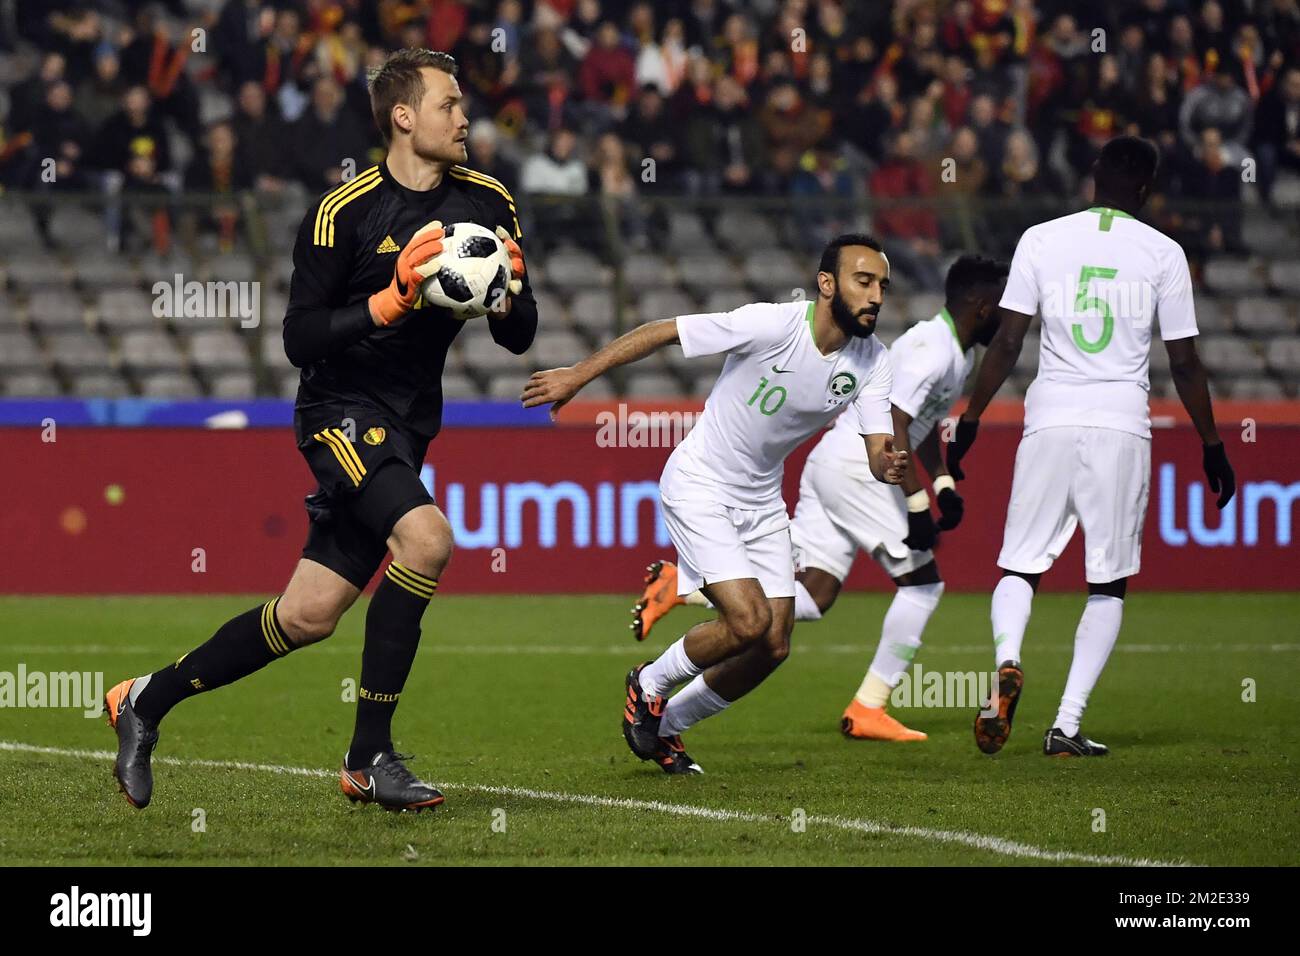 Belgium's goalkeeper Simon Mignolet and Saudi Arabia's forward Mohammad Al-Sahlawi pictured at a friendly game between the Red Devils Belgian National soccer team and Saudi Arabia, in Brussels, Tuesday 27 March 2018. BELGA PHOTO DIRK WAEM Stock Photo